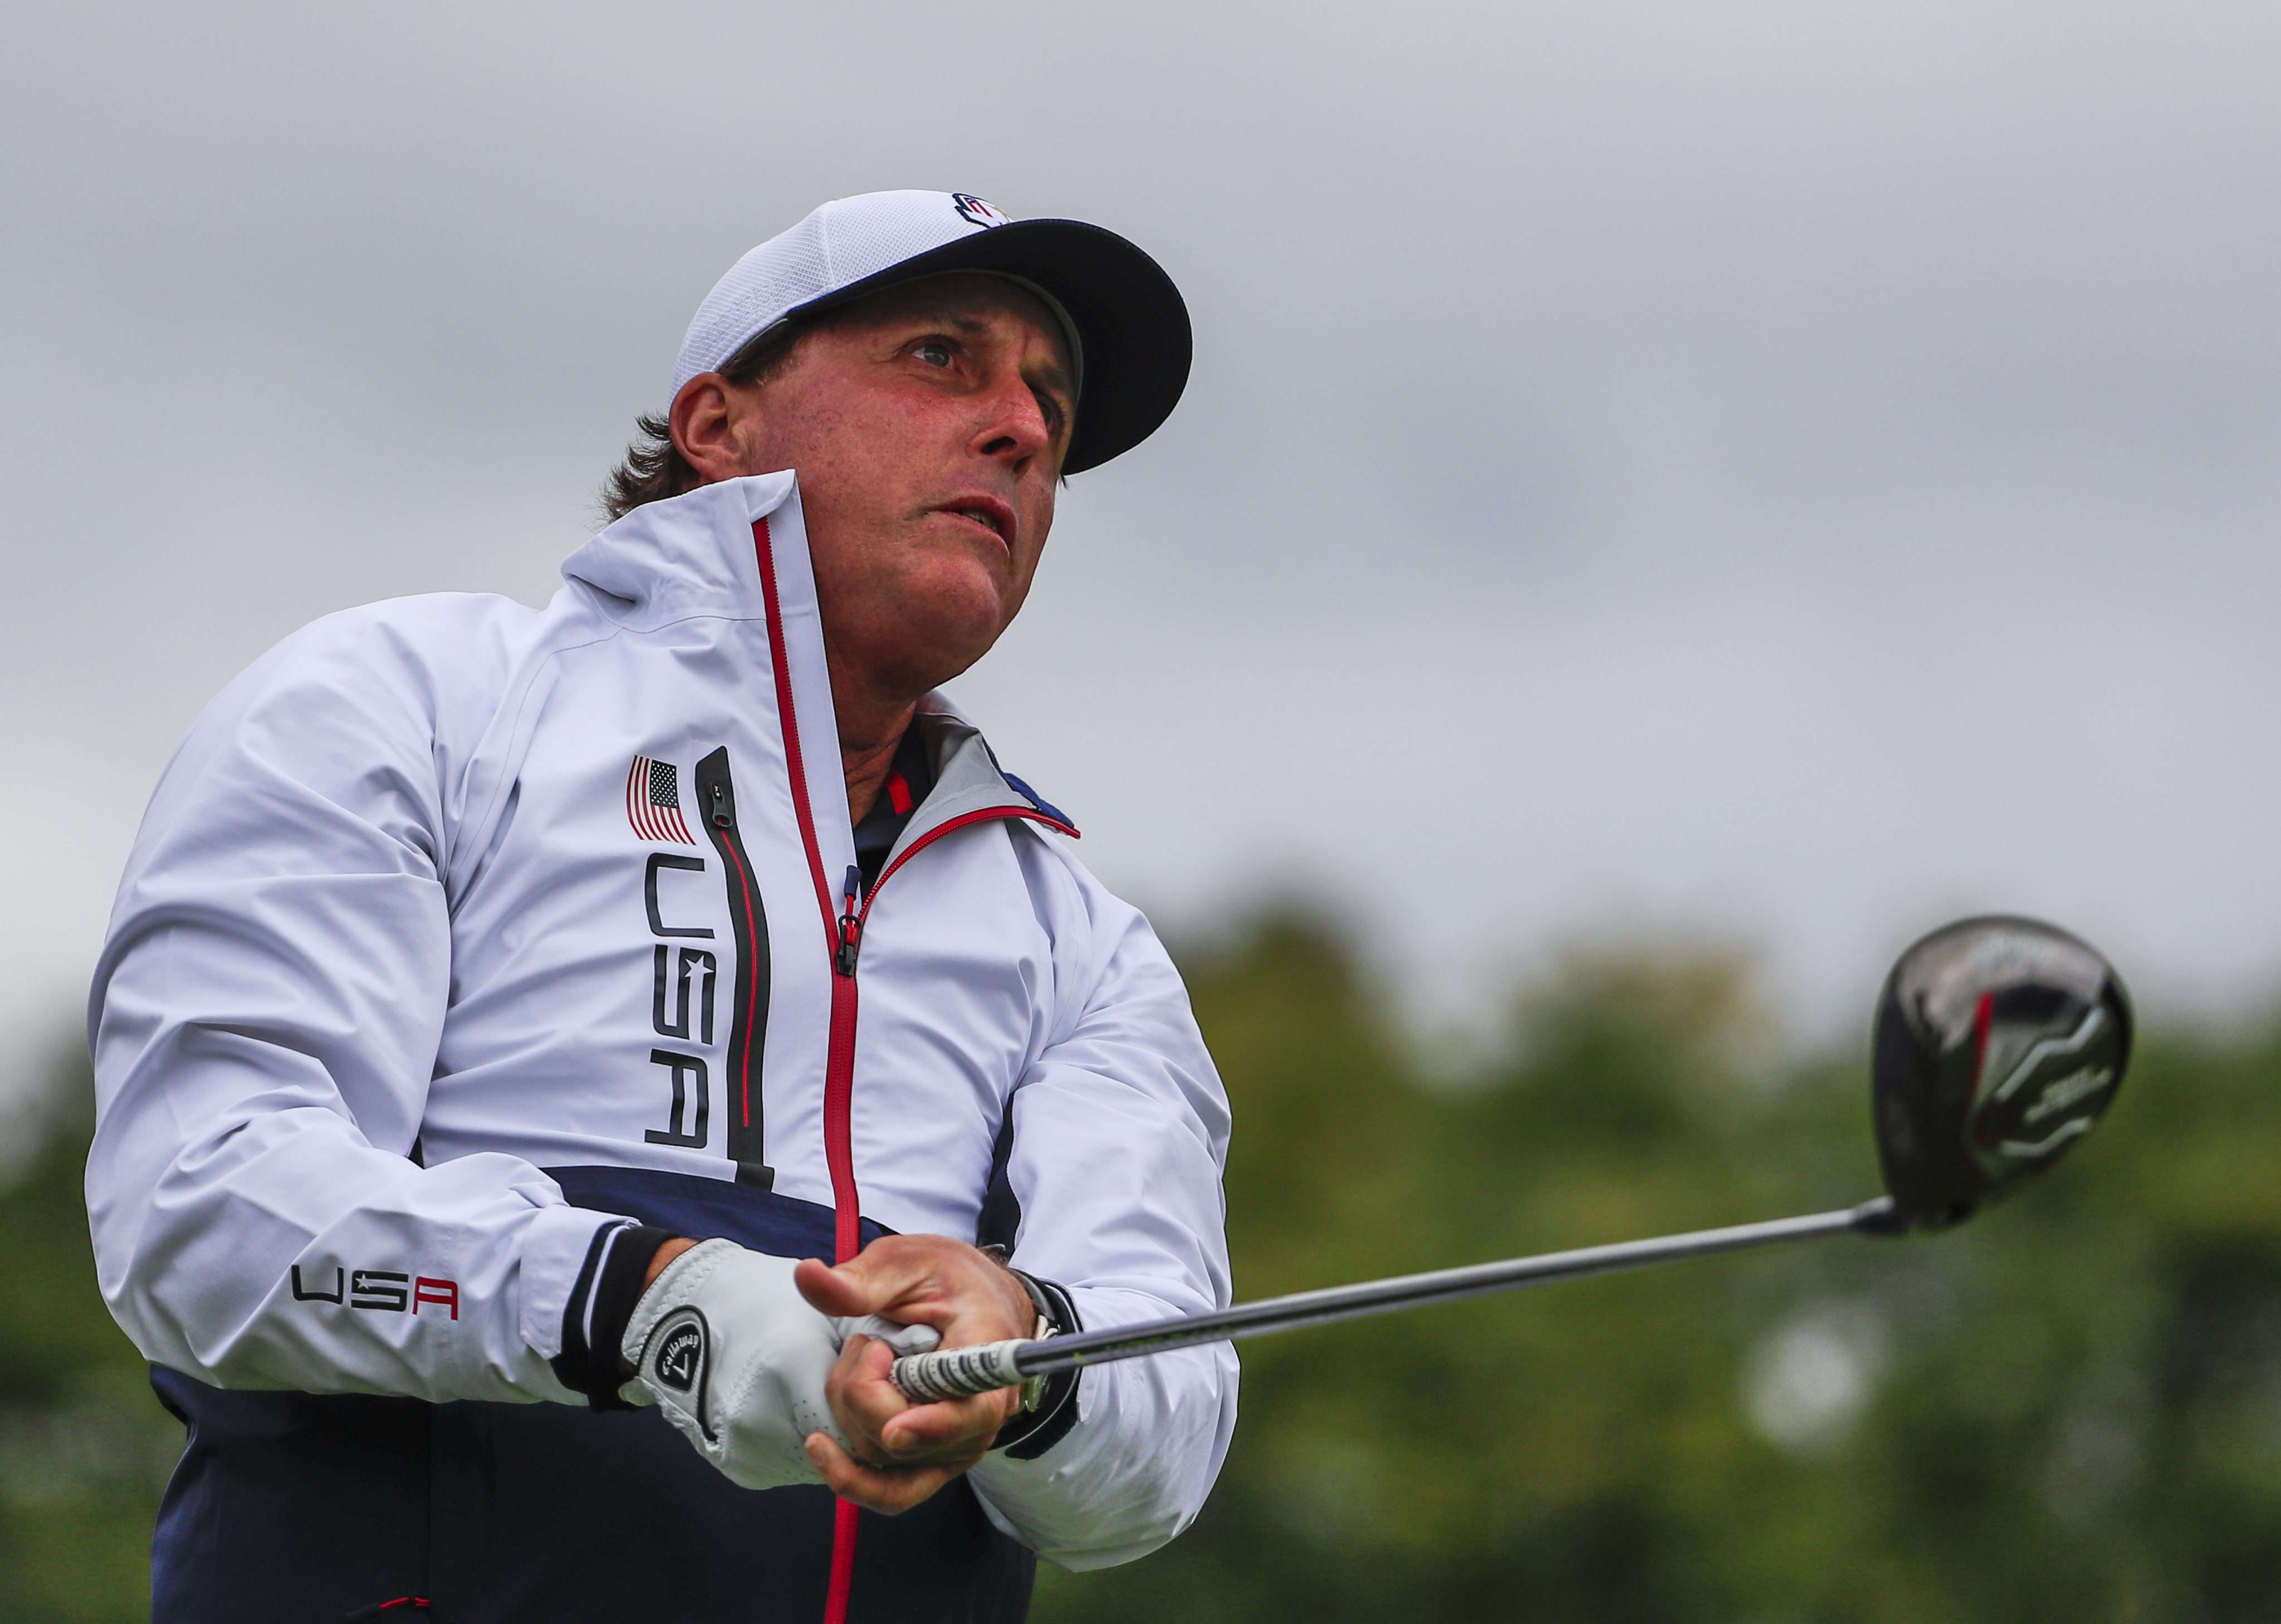 Team USA’s Phil Mickelson has hit out at his team’s preparation during previous Ryder Cups. Photo: EPA